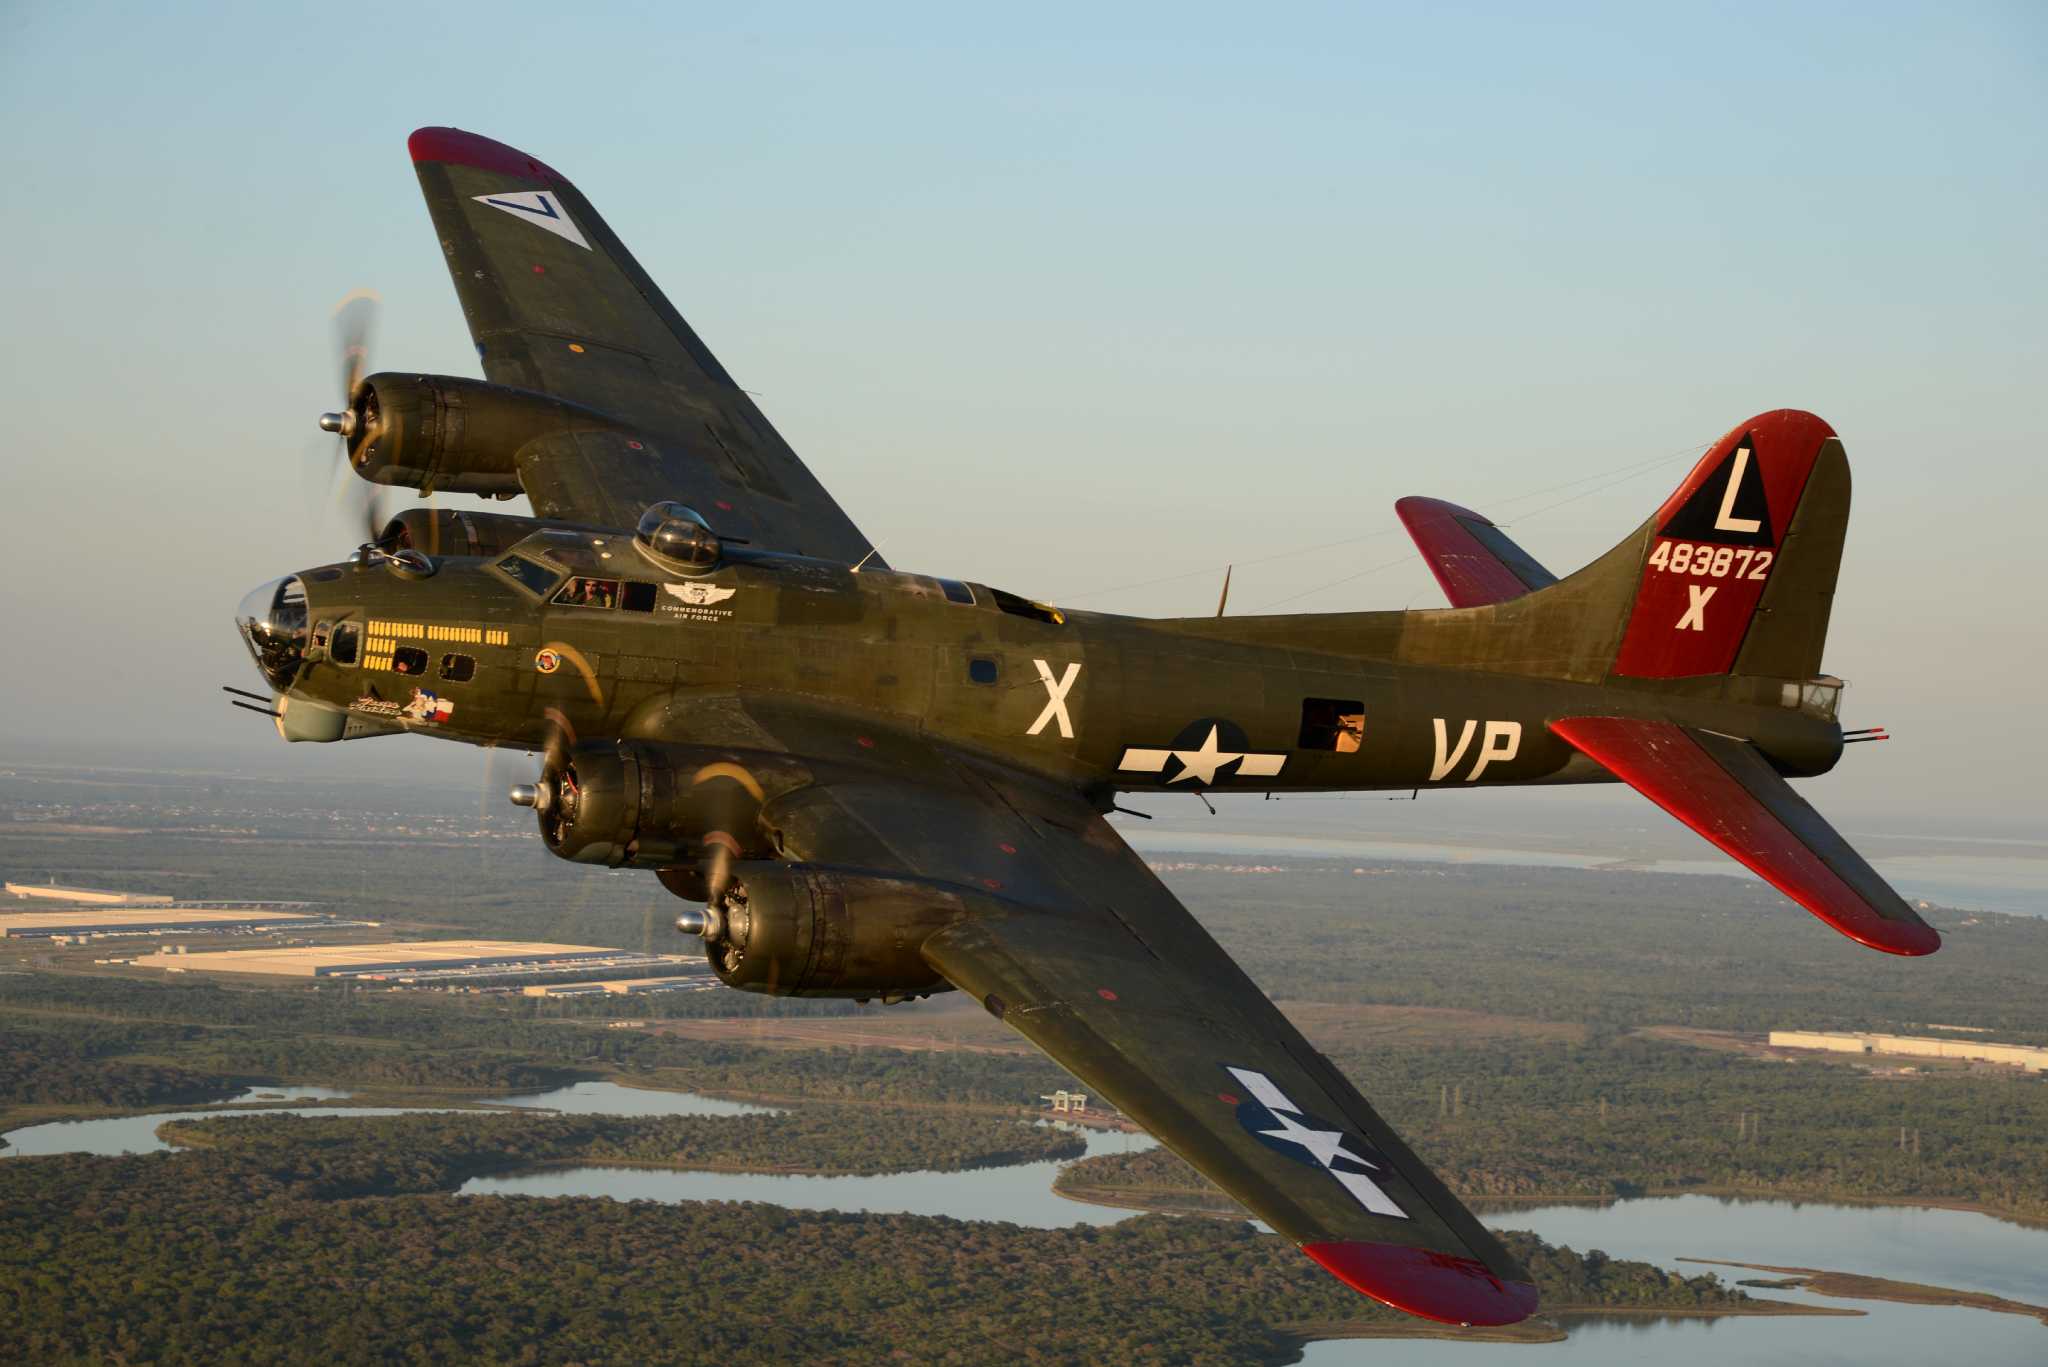 b>Photos:</b> Flying Fortress Bomber - Los Angeles Times